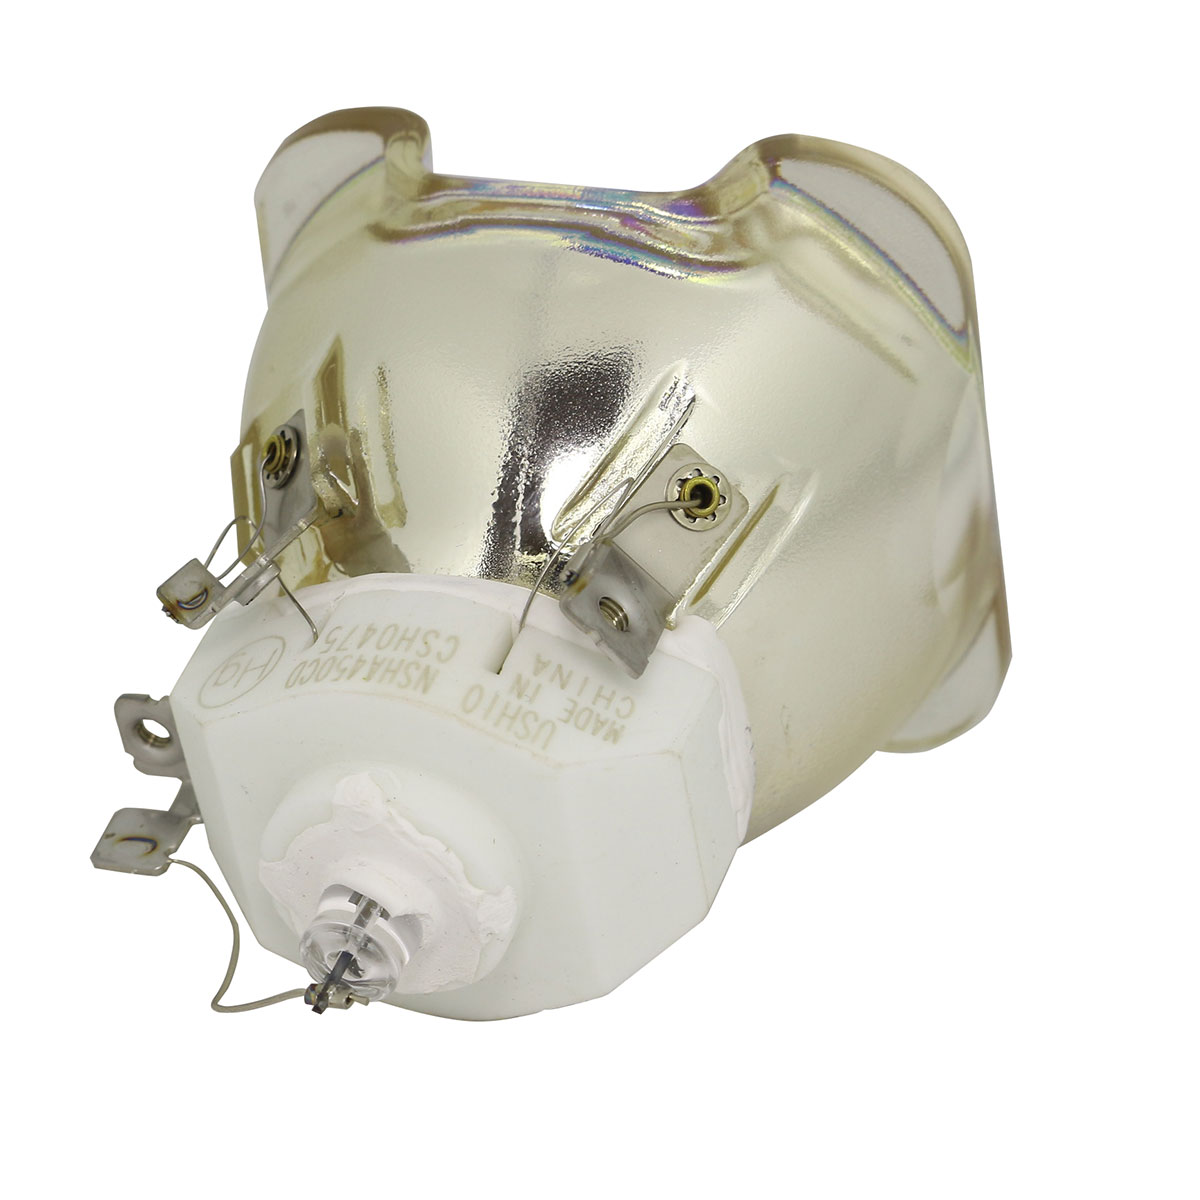 Ushio NSH Replacement Bulb for the Christie Digital Boxer 2K20 Projector - image 5 of 8